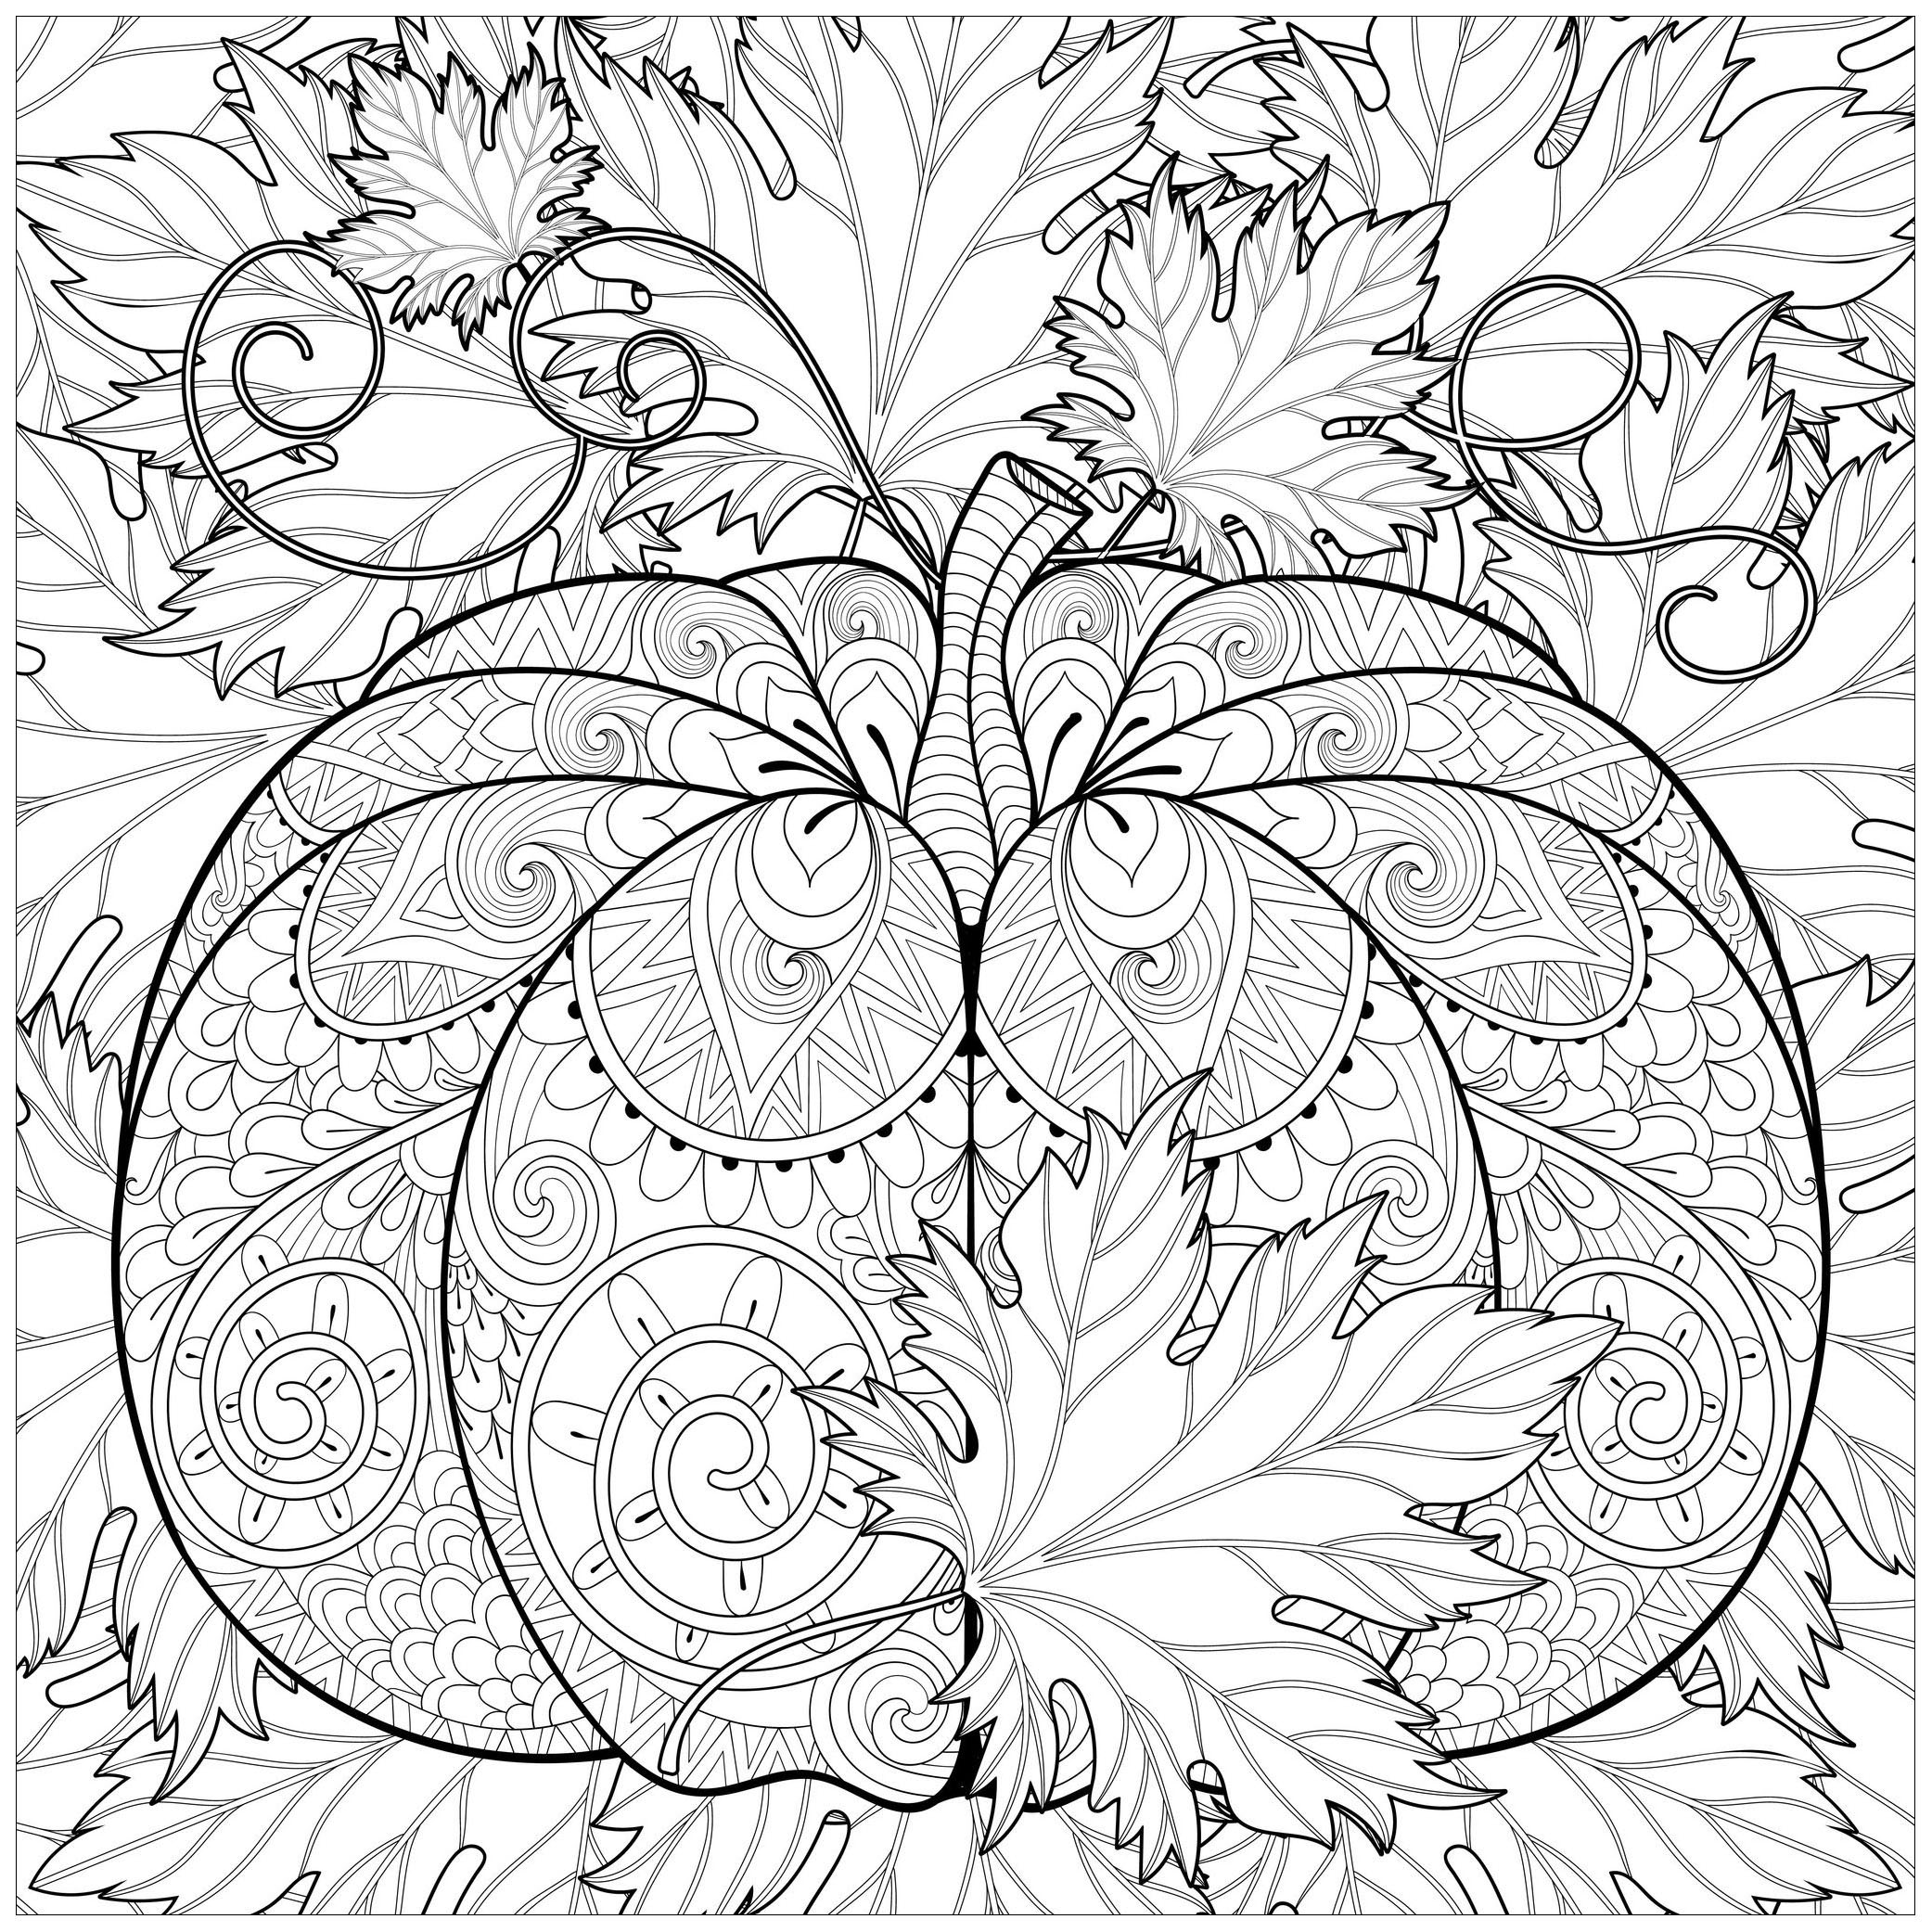 880 Cartoon Fall Acorn Coloring Pages for Adult